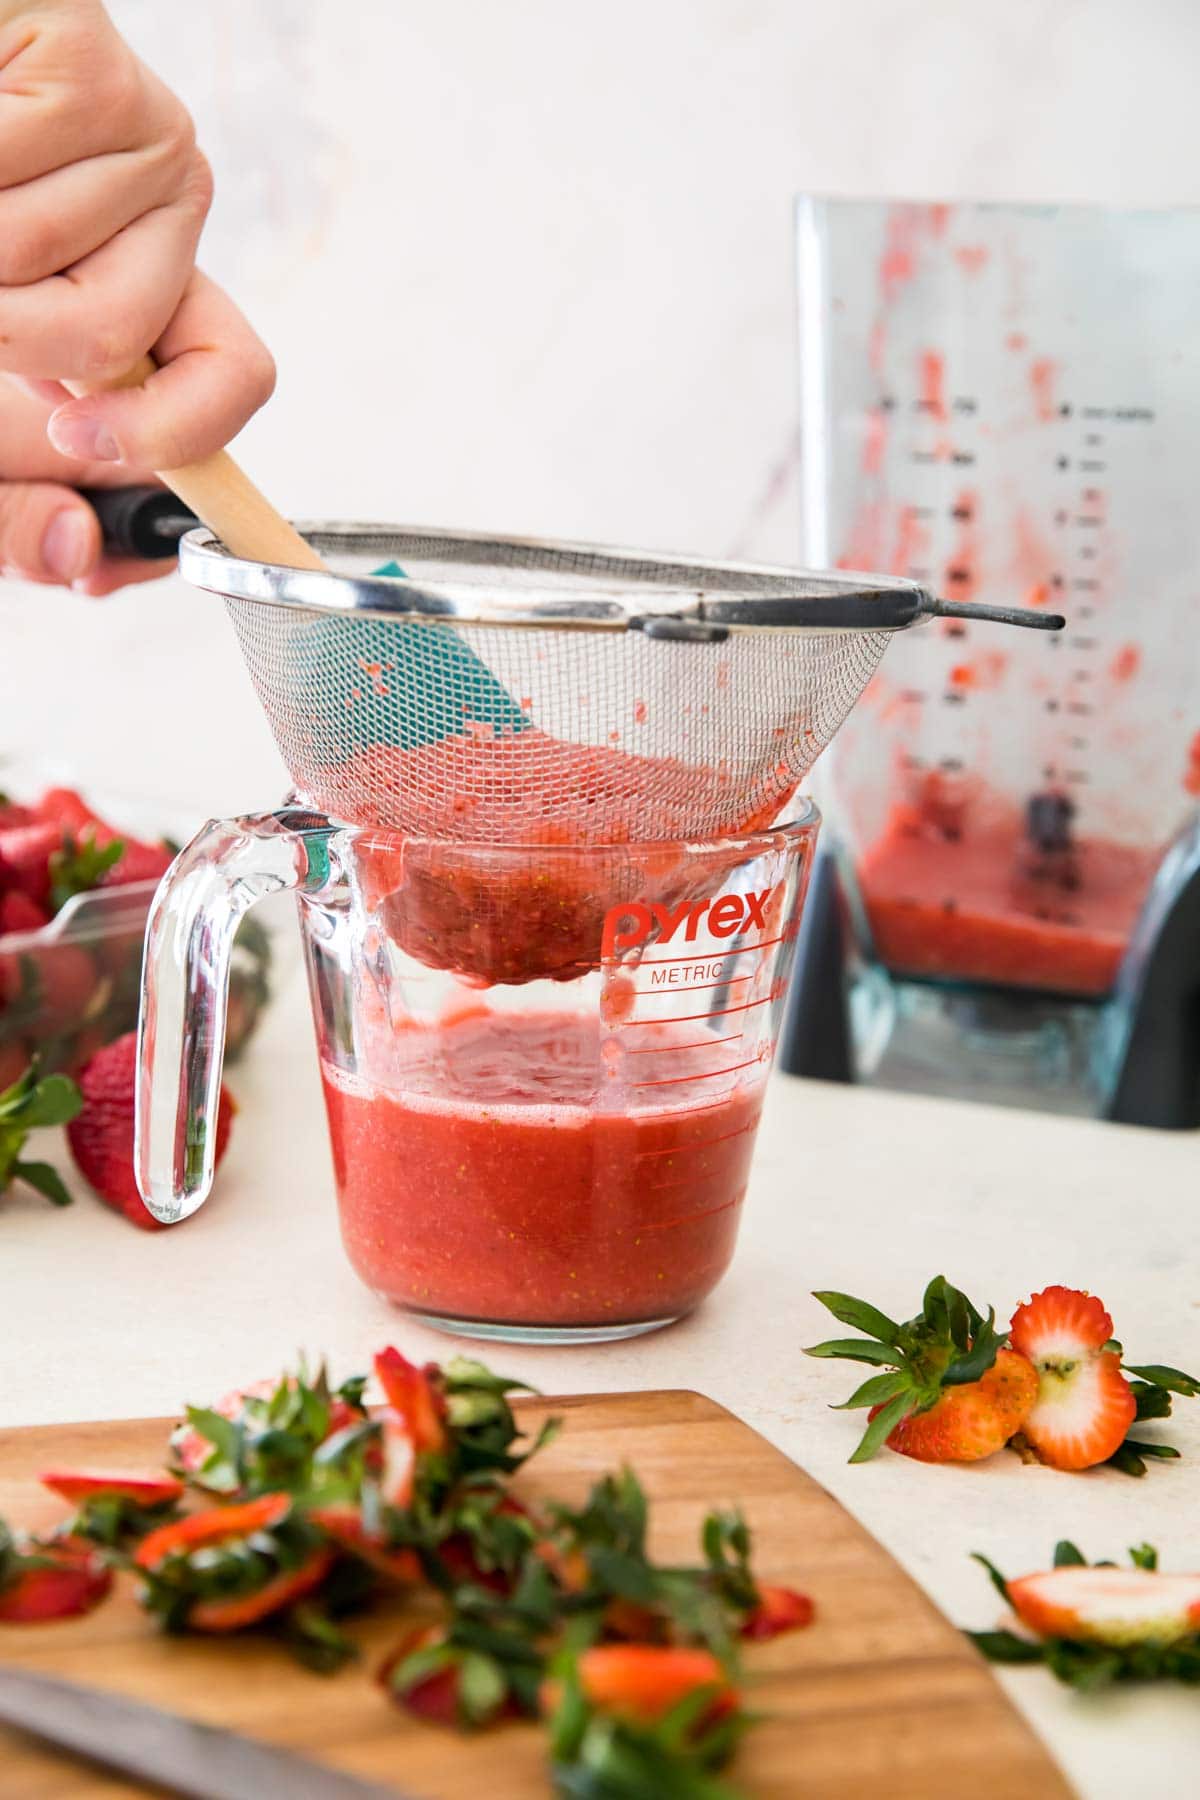 straining pureed strawberries into measuring cup